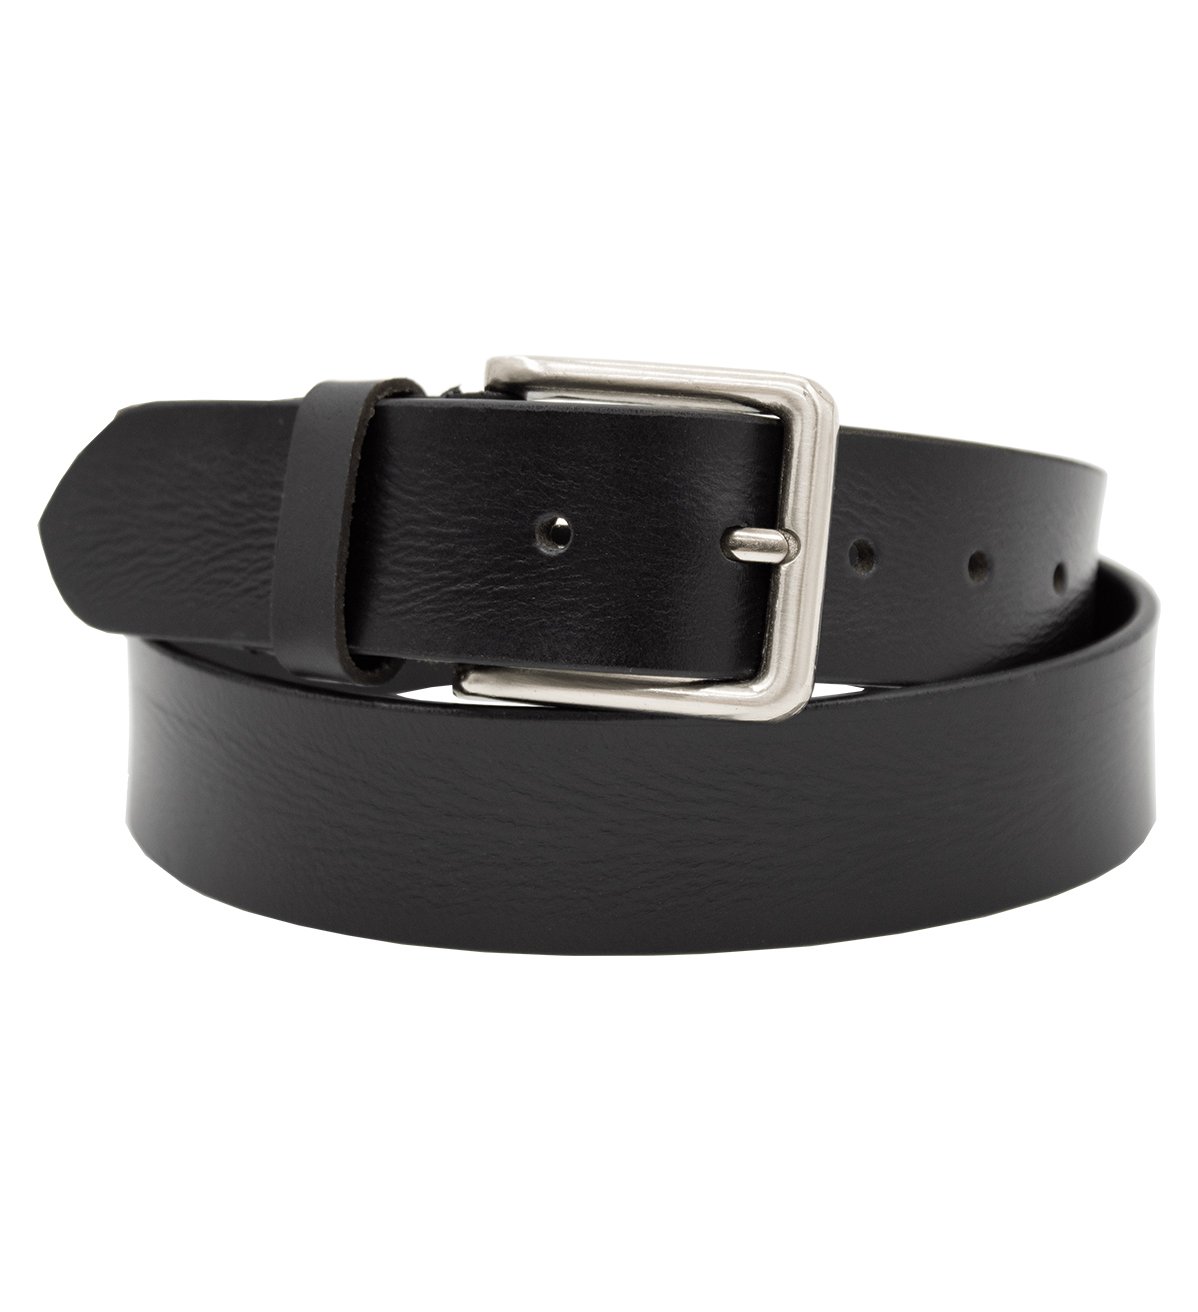 MACHO - Men's Leather Belt with Silver Buckle - #BT-801